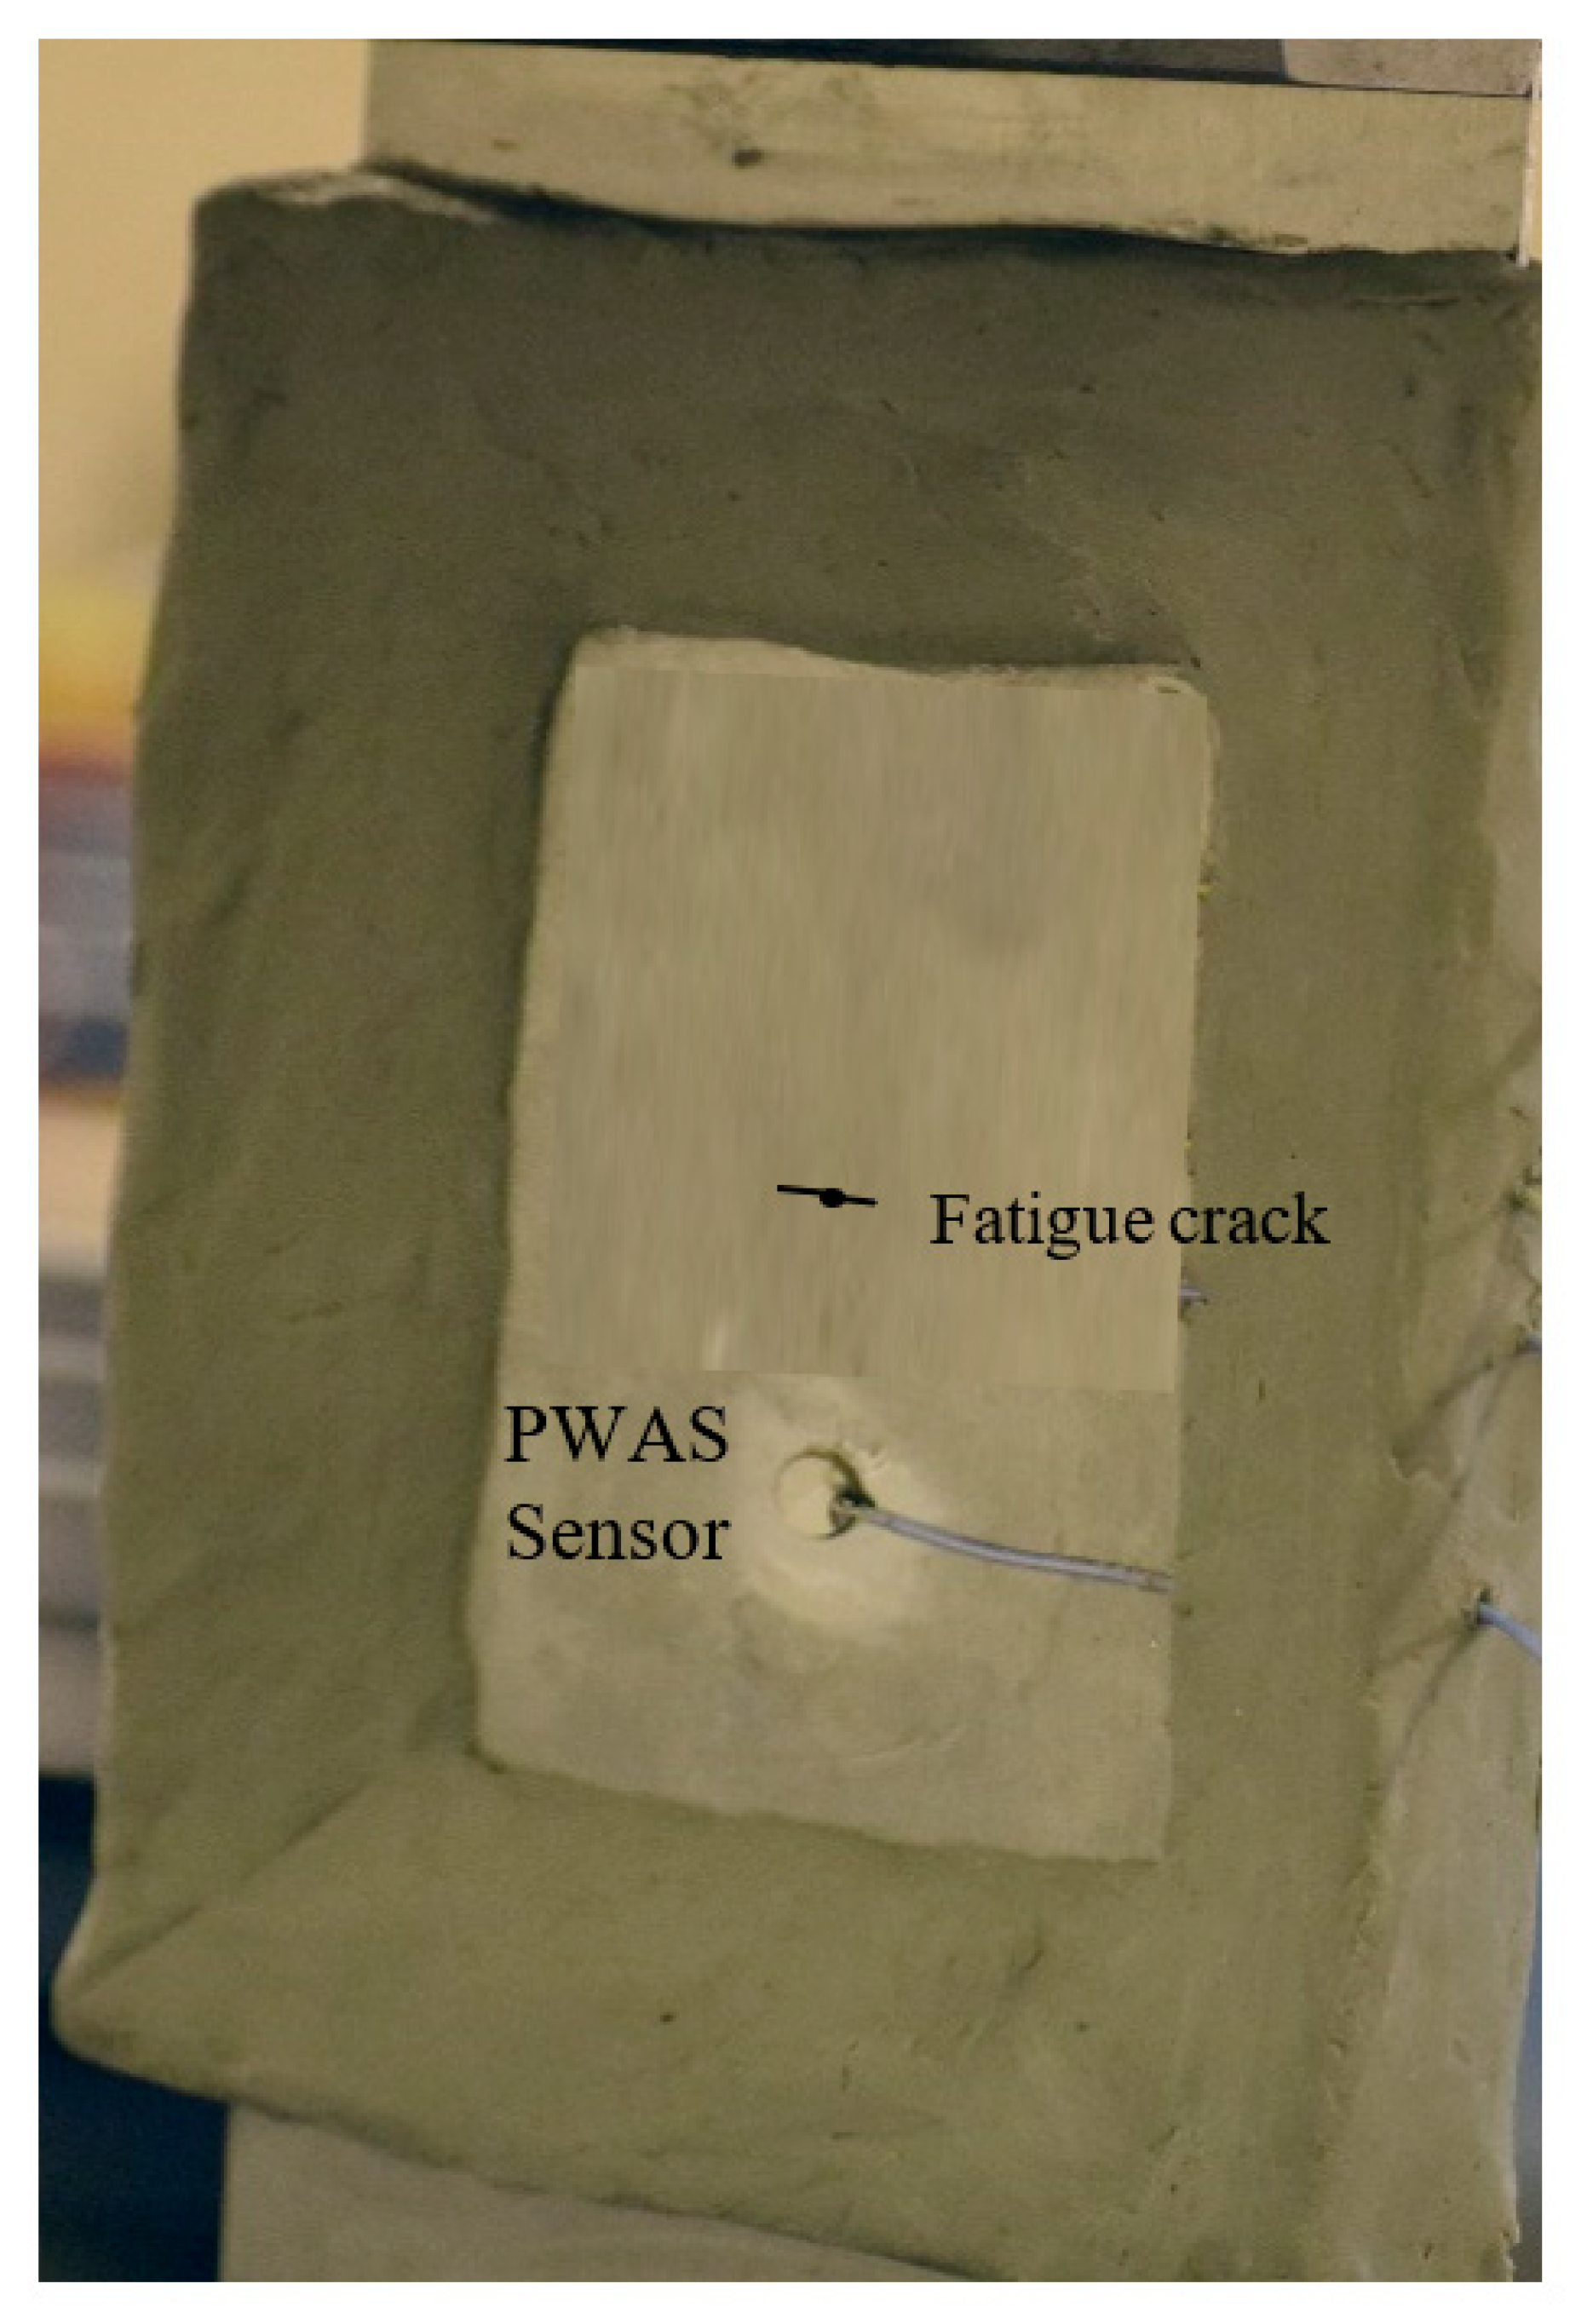 Sensors Free Full Text Analytical And Experimental Study Of Fatigue Crack Growth Ae Signals In Thin Sheet Metals Html